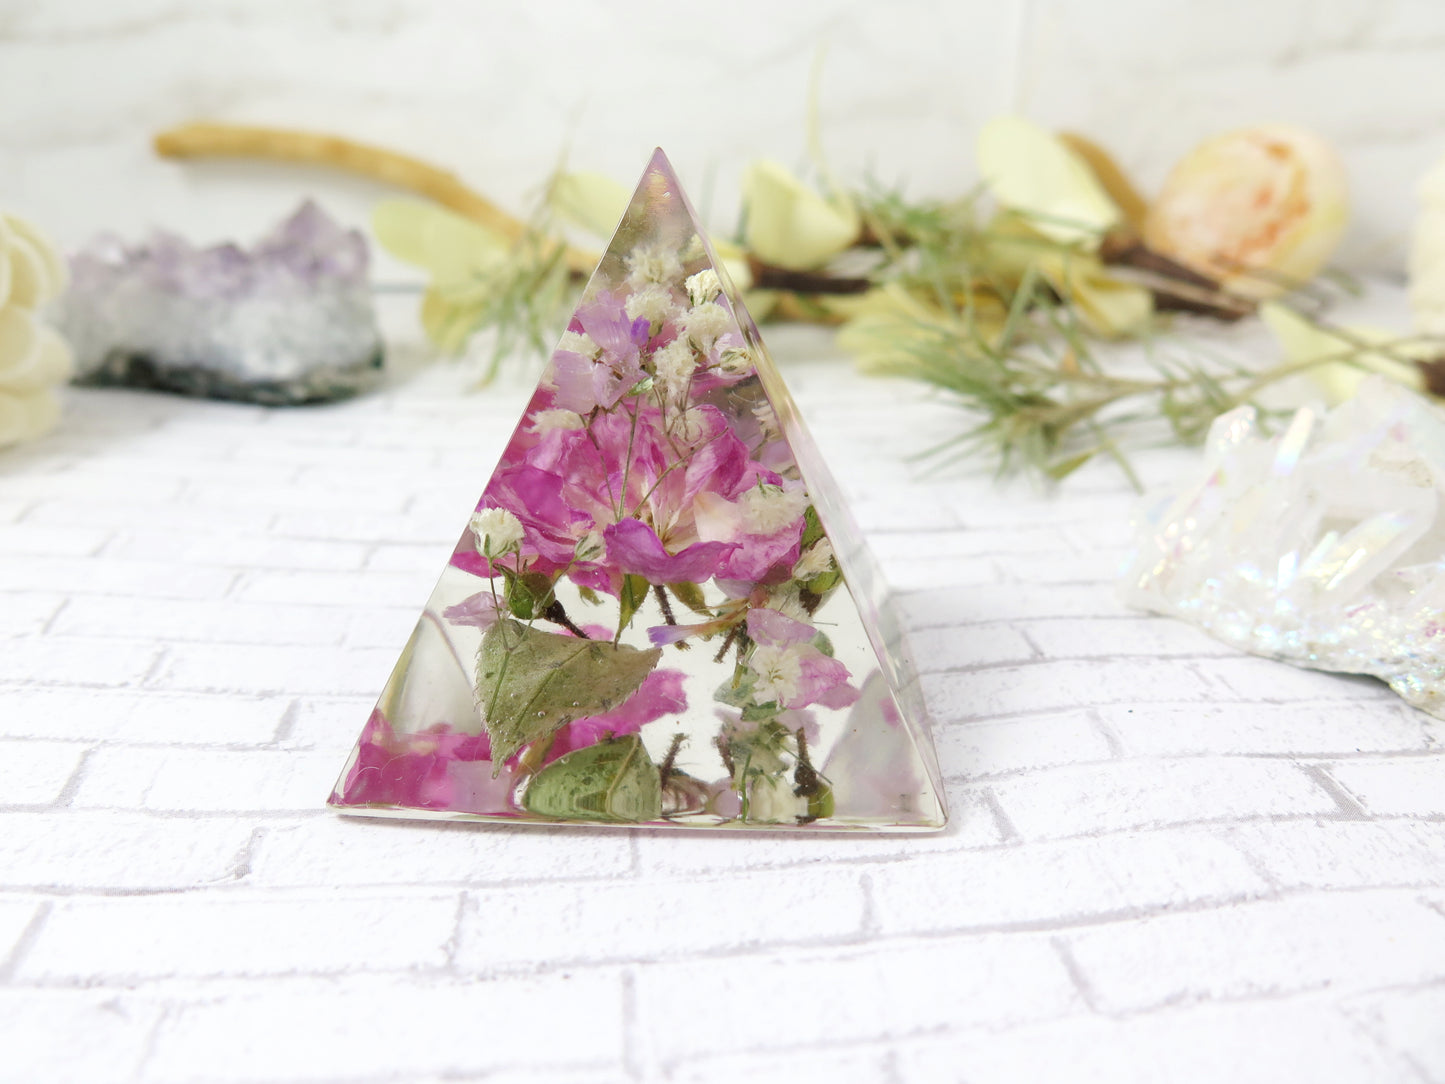 Pink Roses pyramid, paperweinght desk decor real flower pyramid